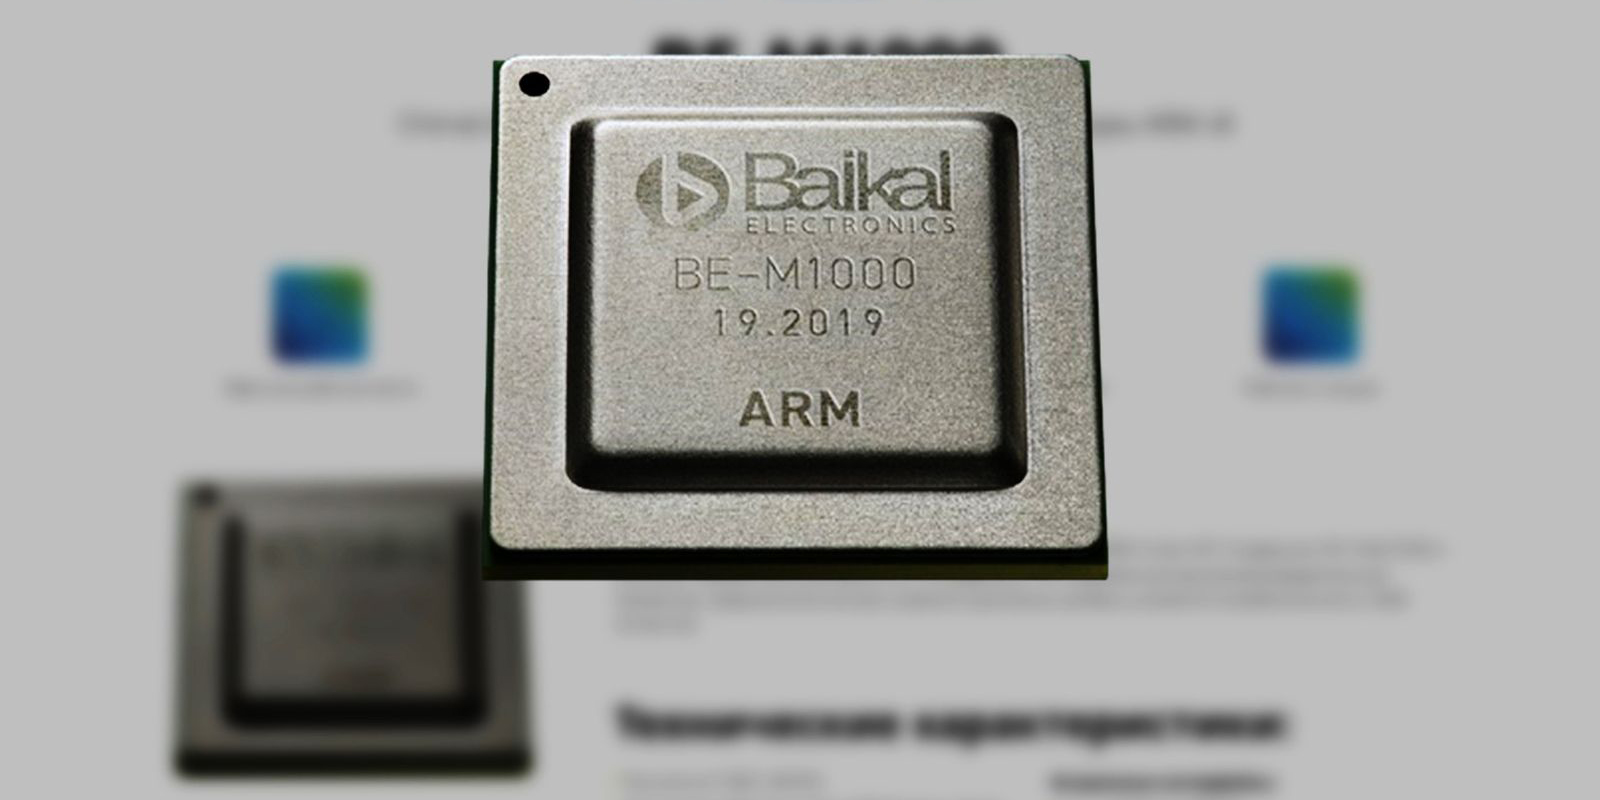 Russian customers cannot receive Baikal and Elbrus processors because suppliers refuse to ship them to Russia.